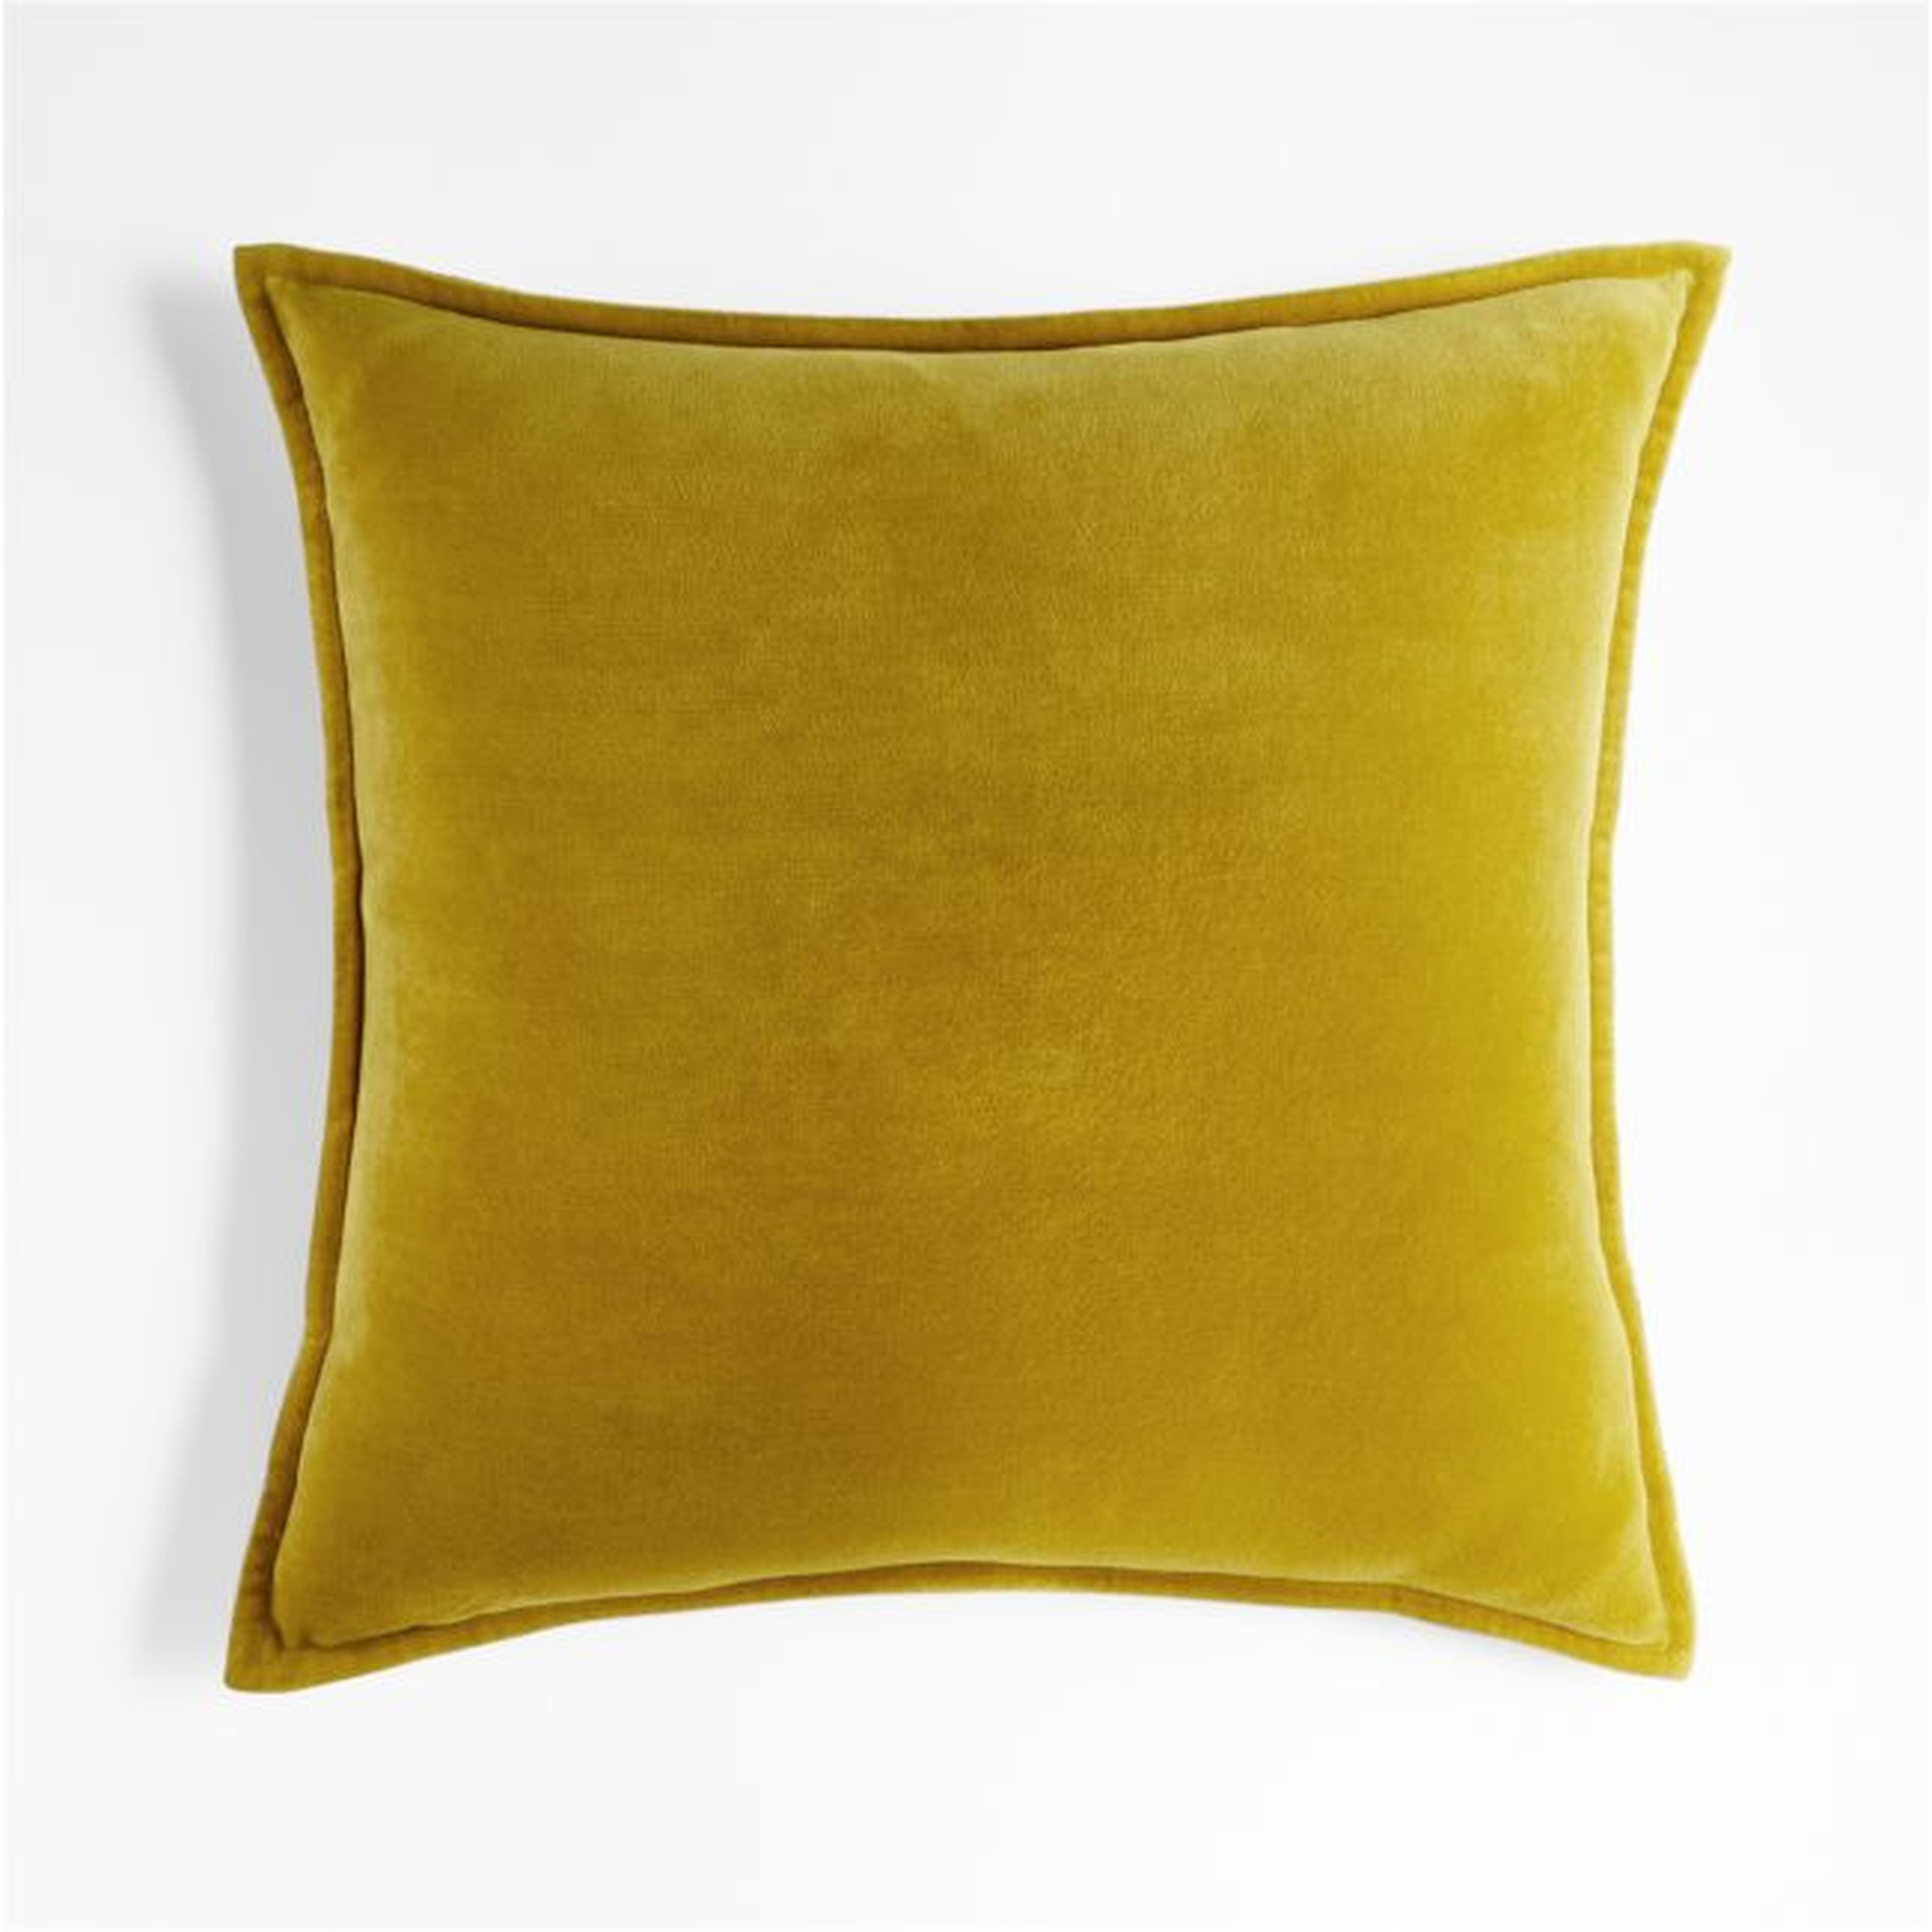 Ochre 20" Washed Cotton Velvet Pillow Cover with Down-Alternative Insert - Crate and Barrel